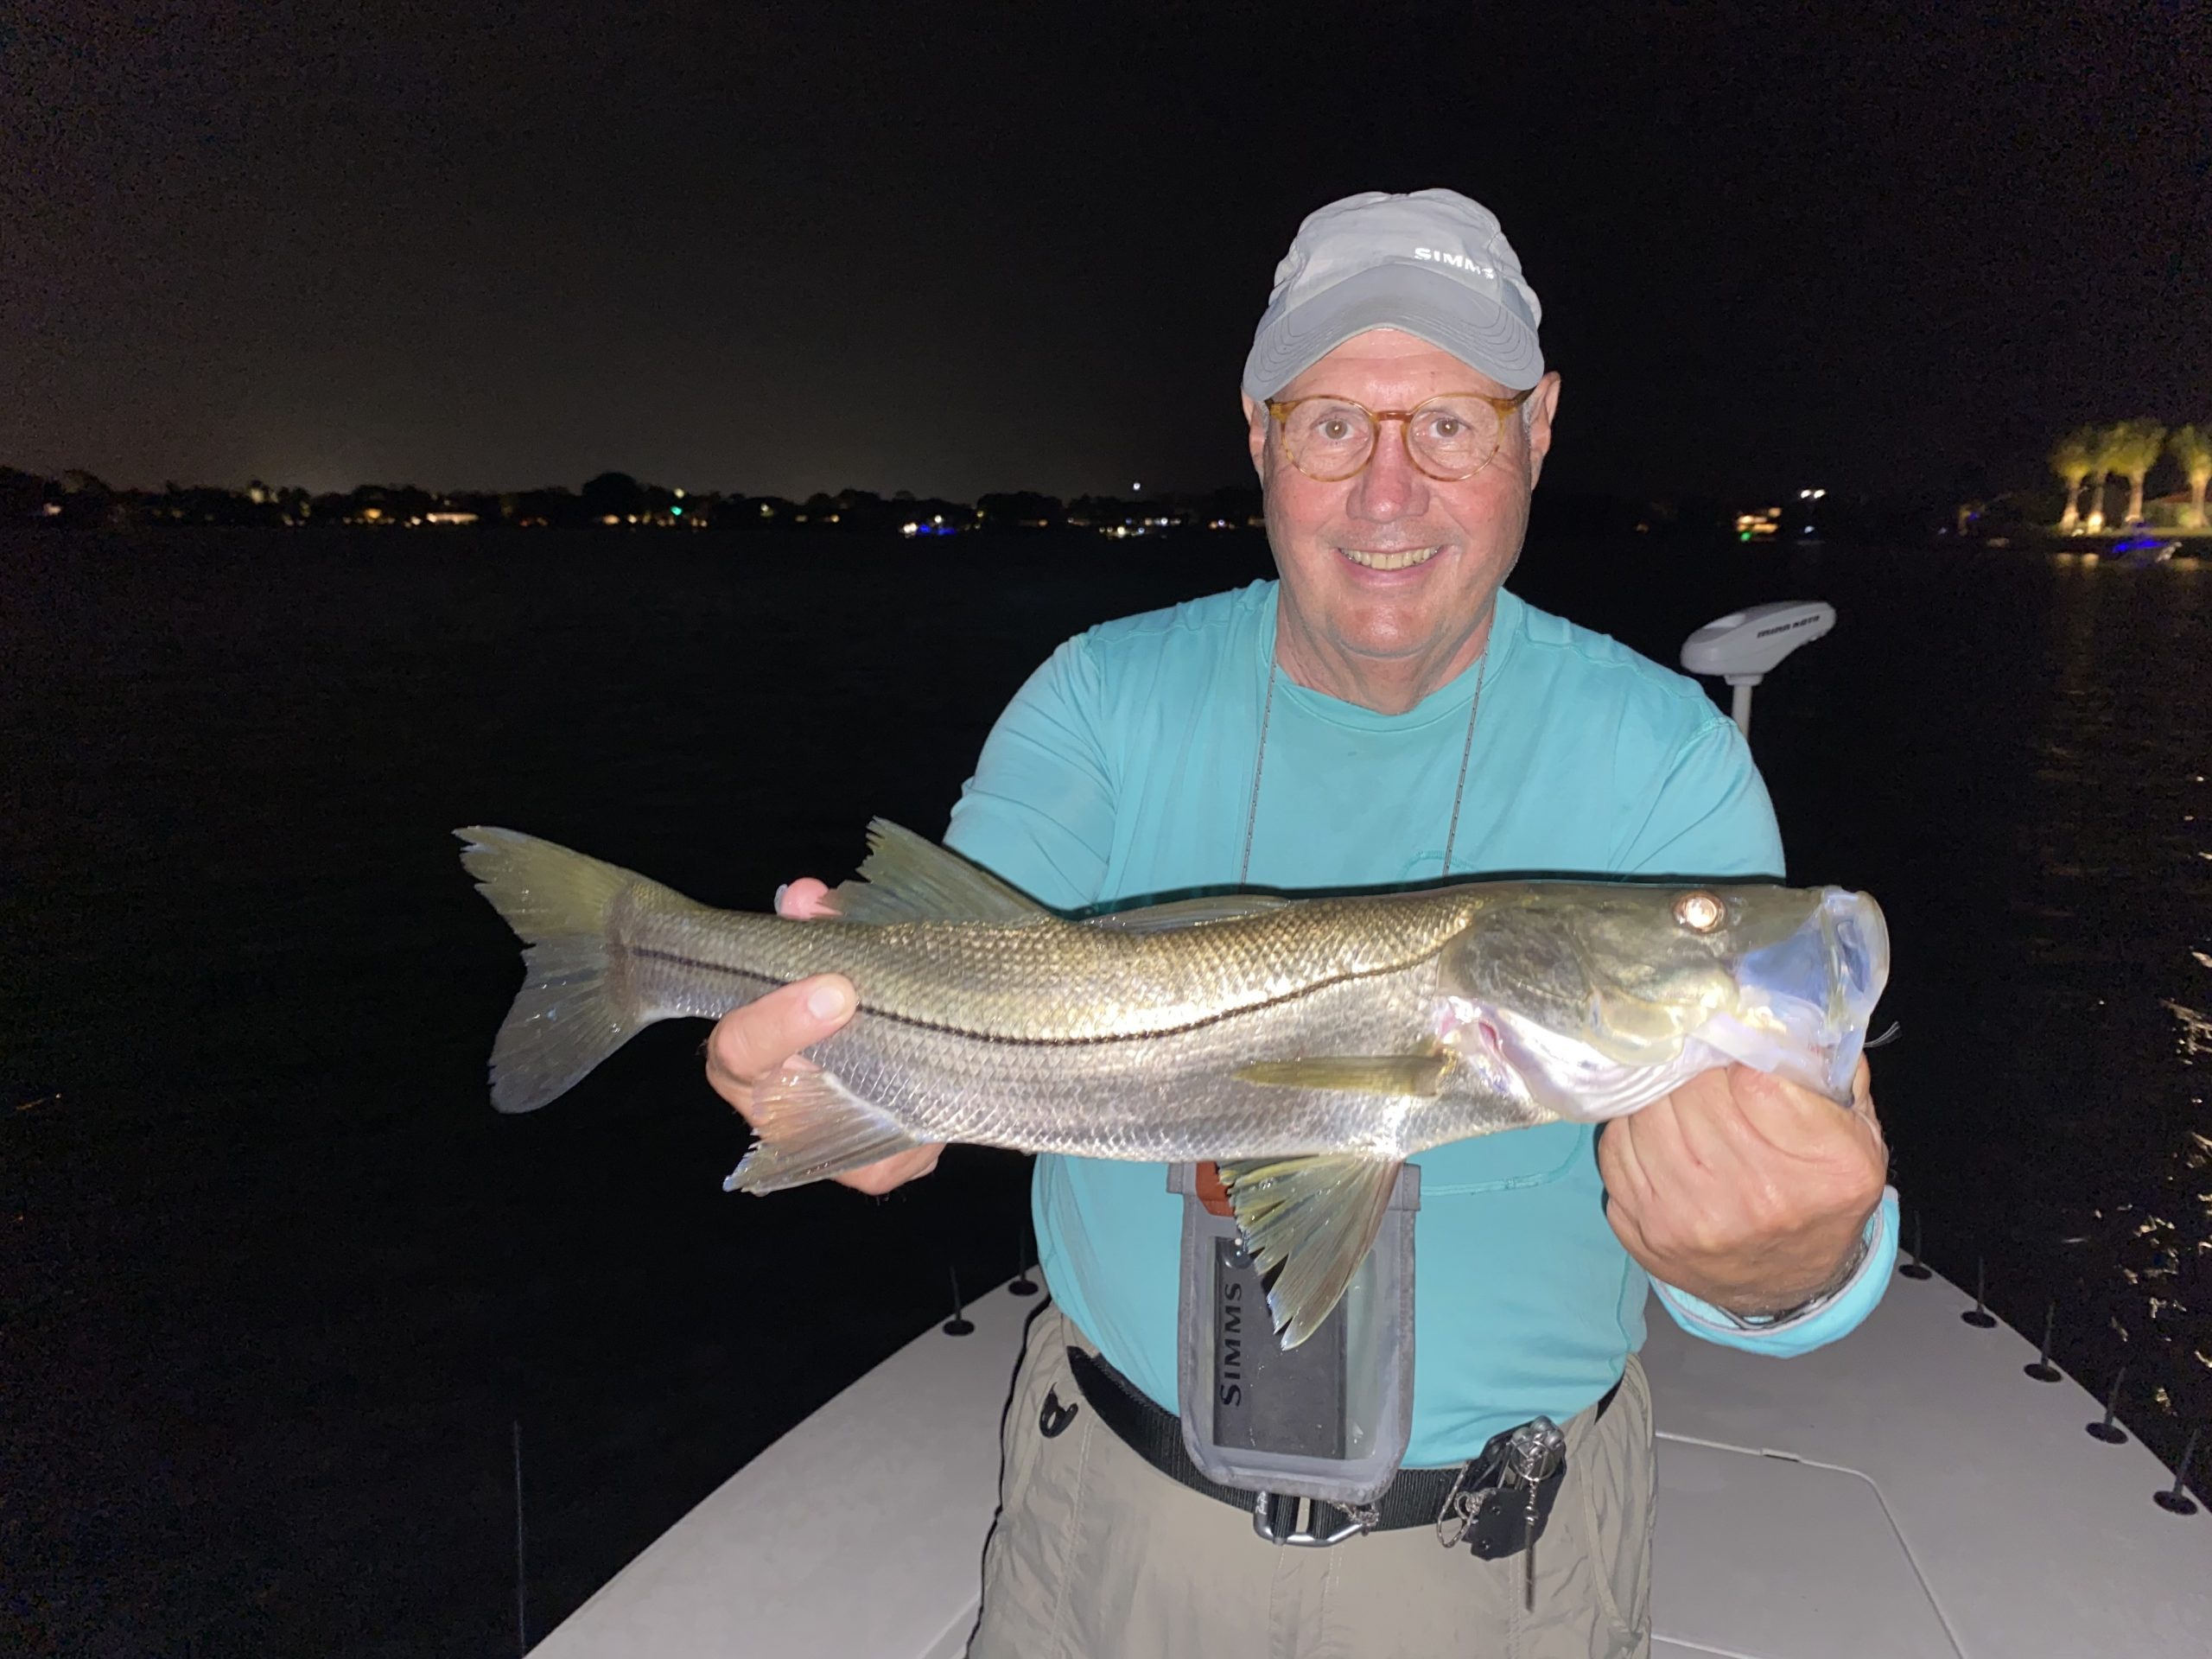 An angler holds a snook that he caught while fly fishing at night in snook alley